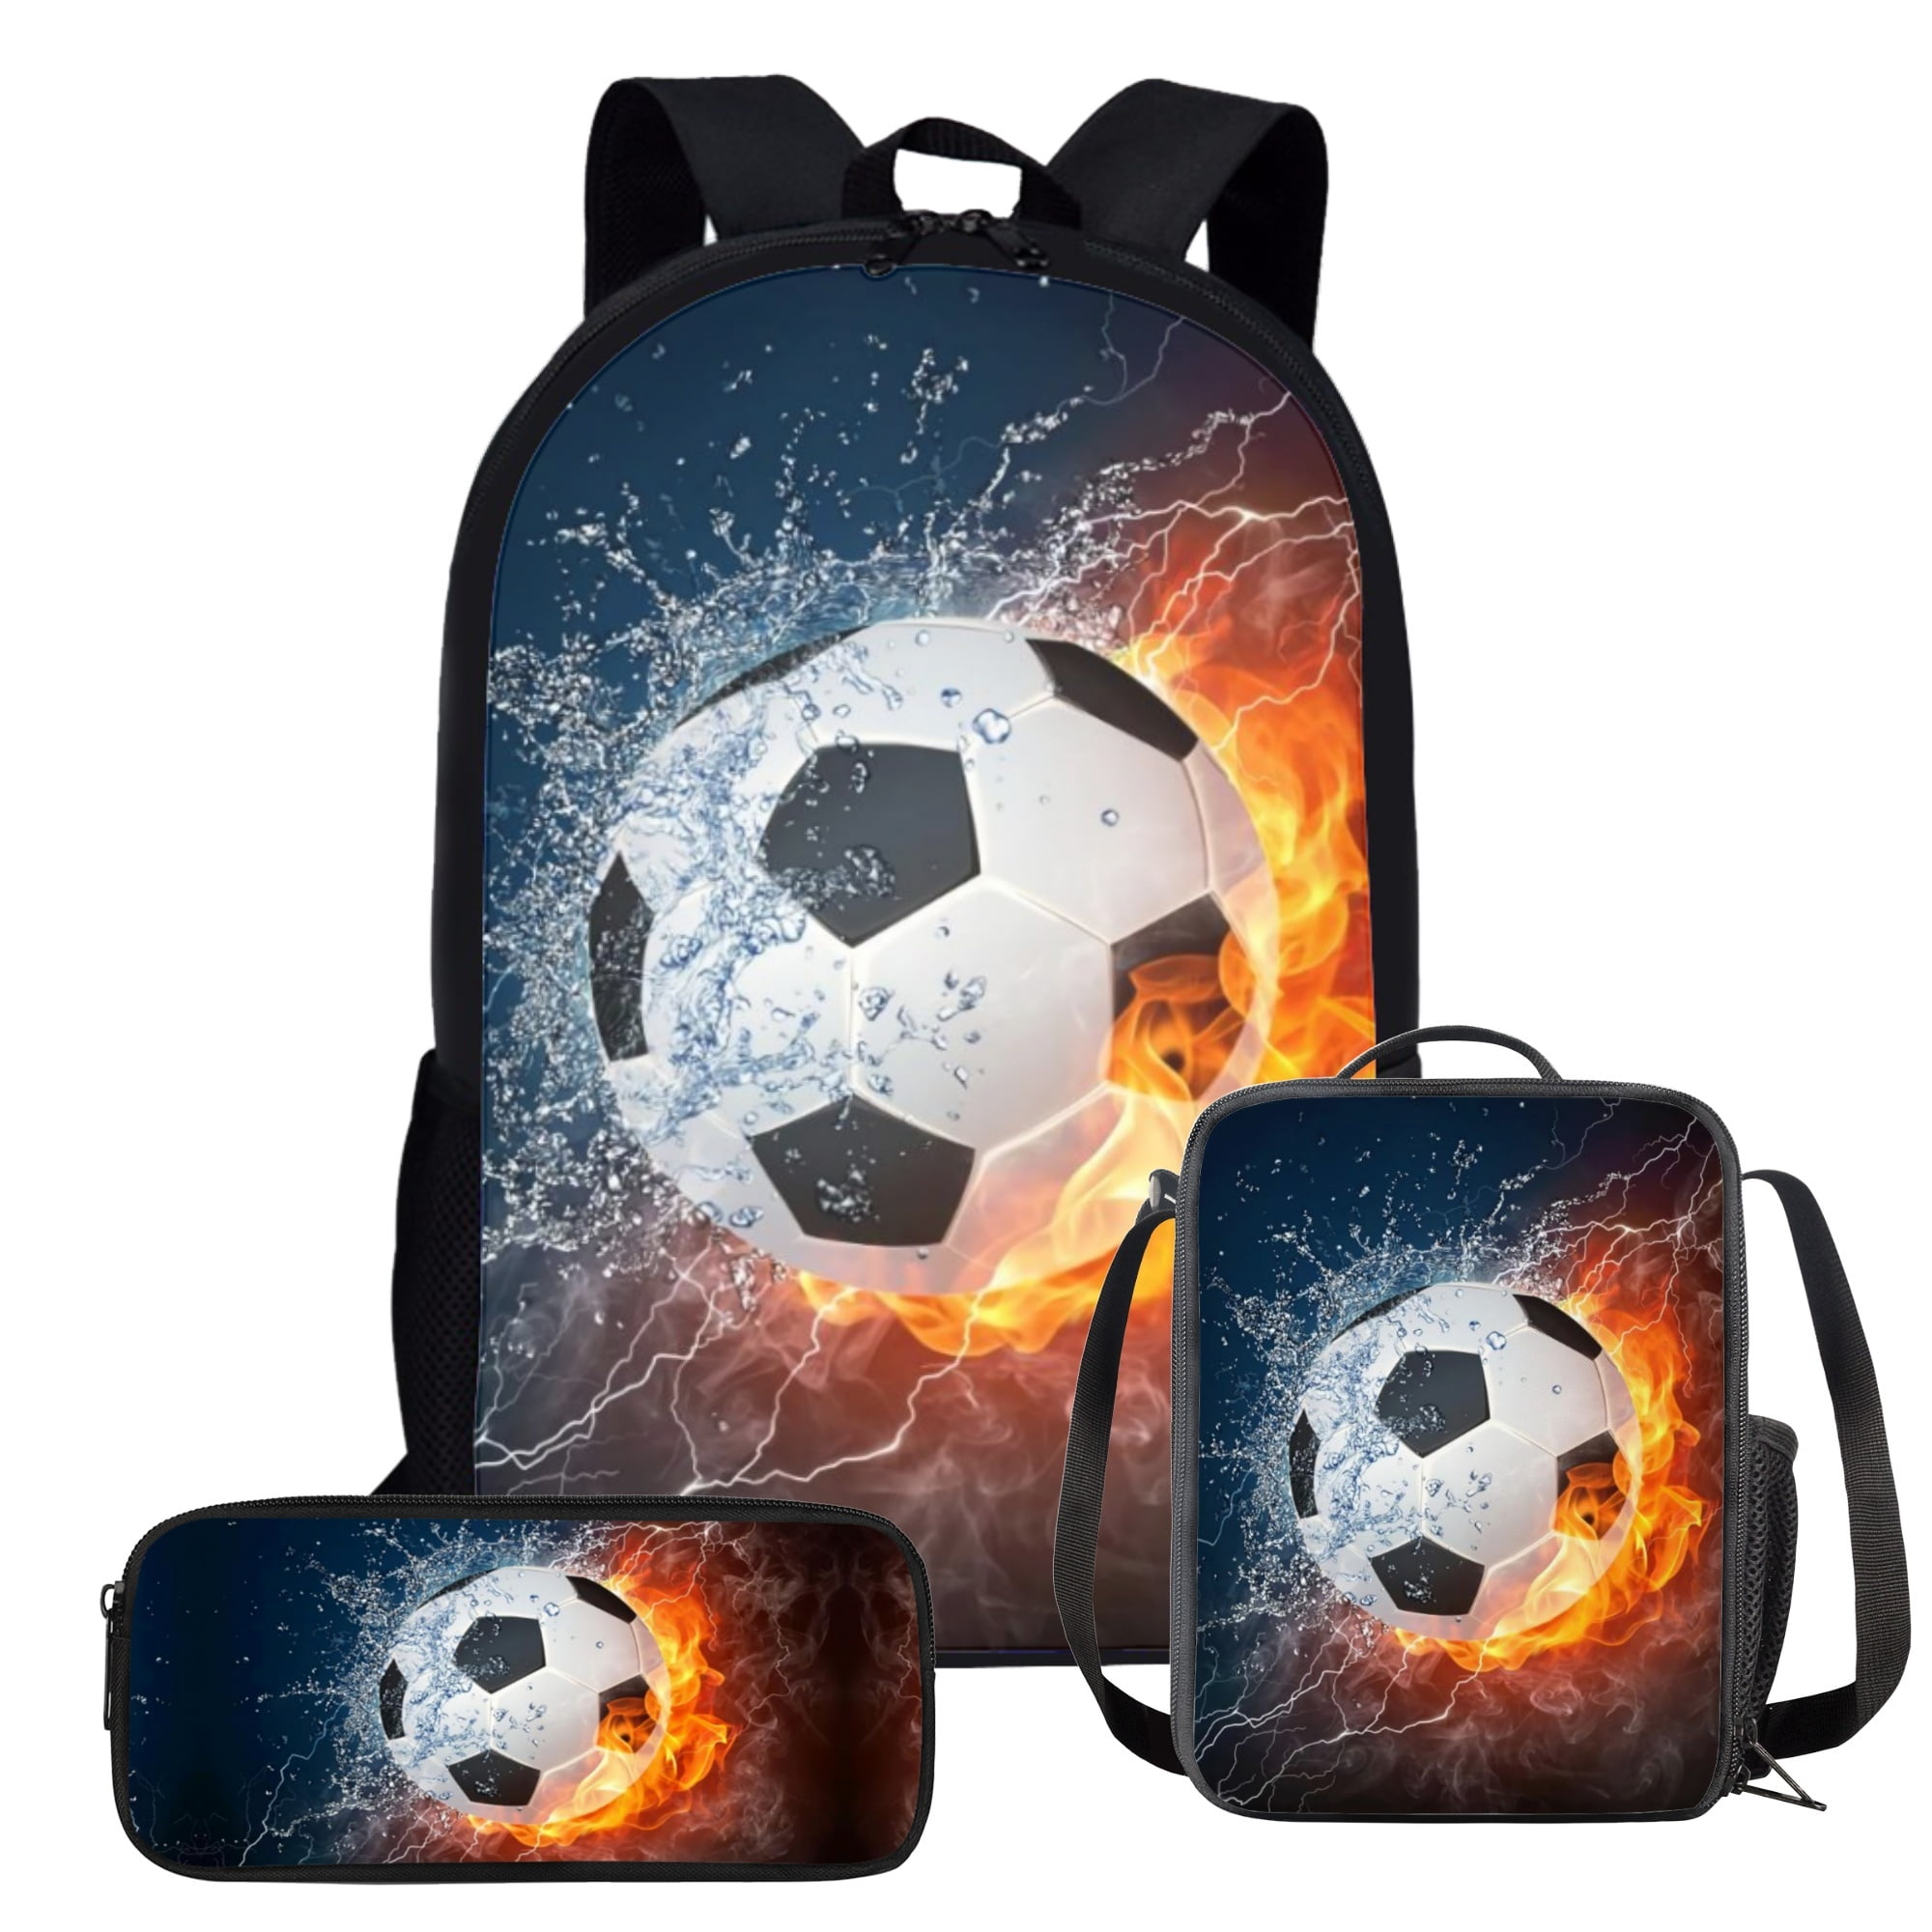 Sport Ball Basketball Lunch Box Portable Insulated Lunch Bag Mini